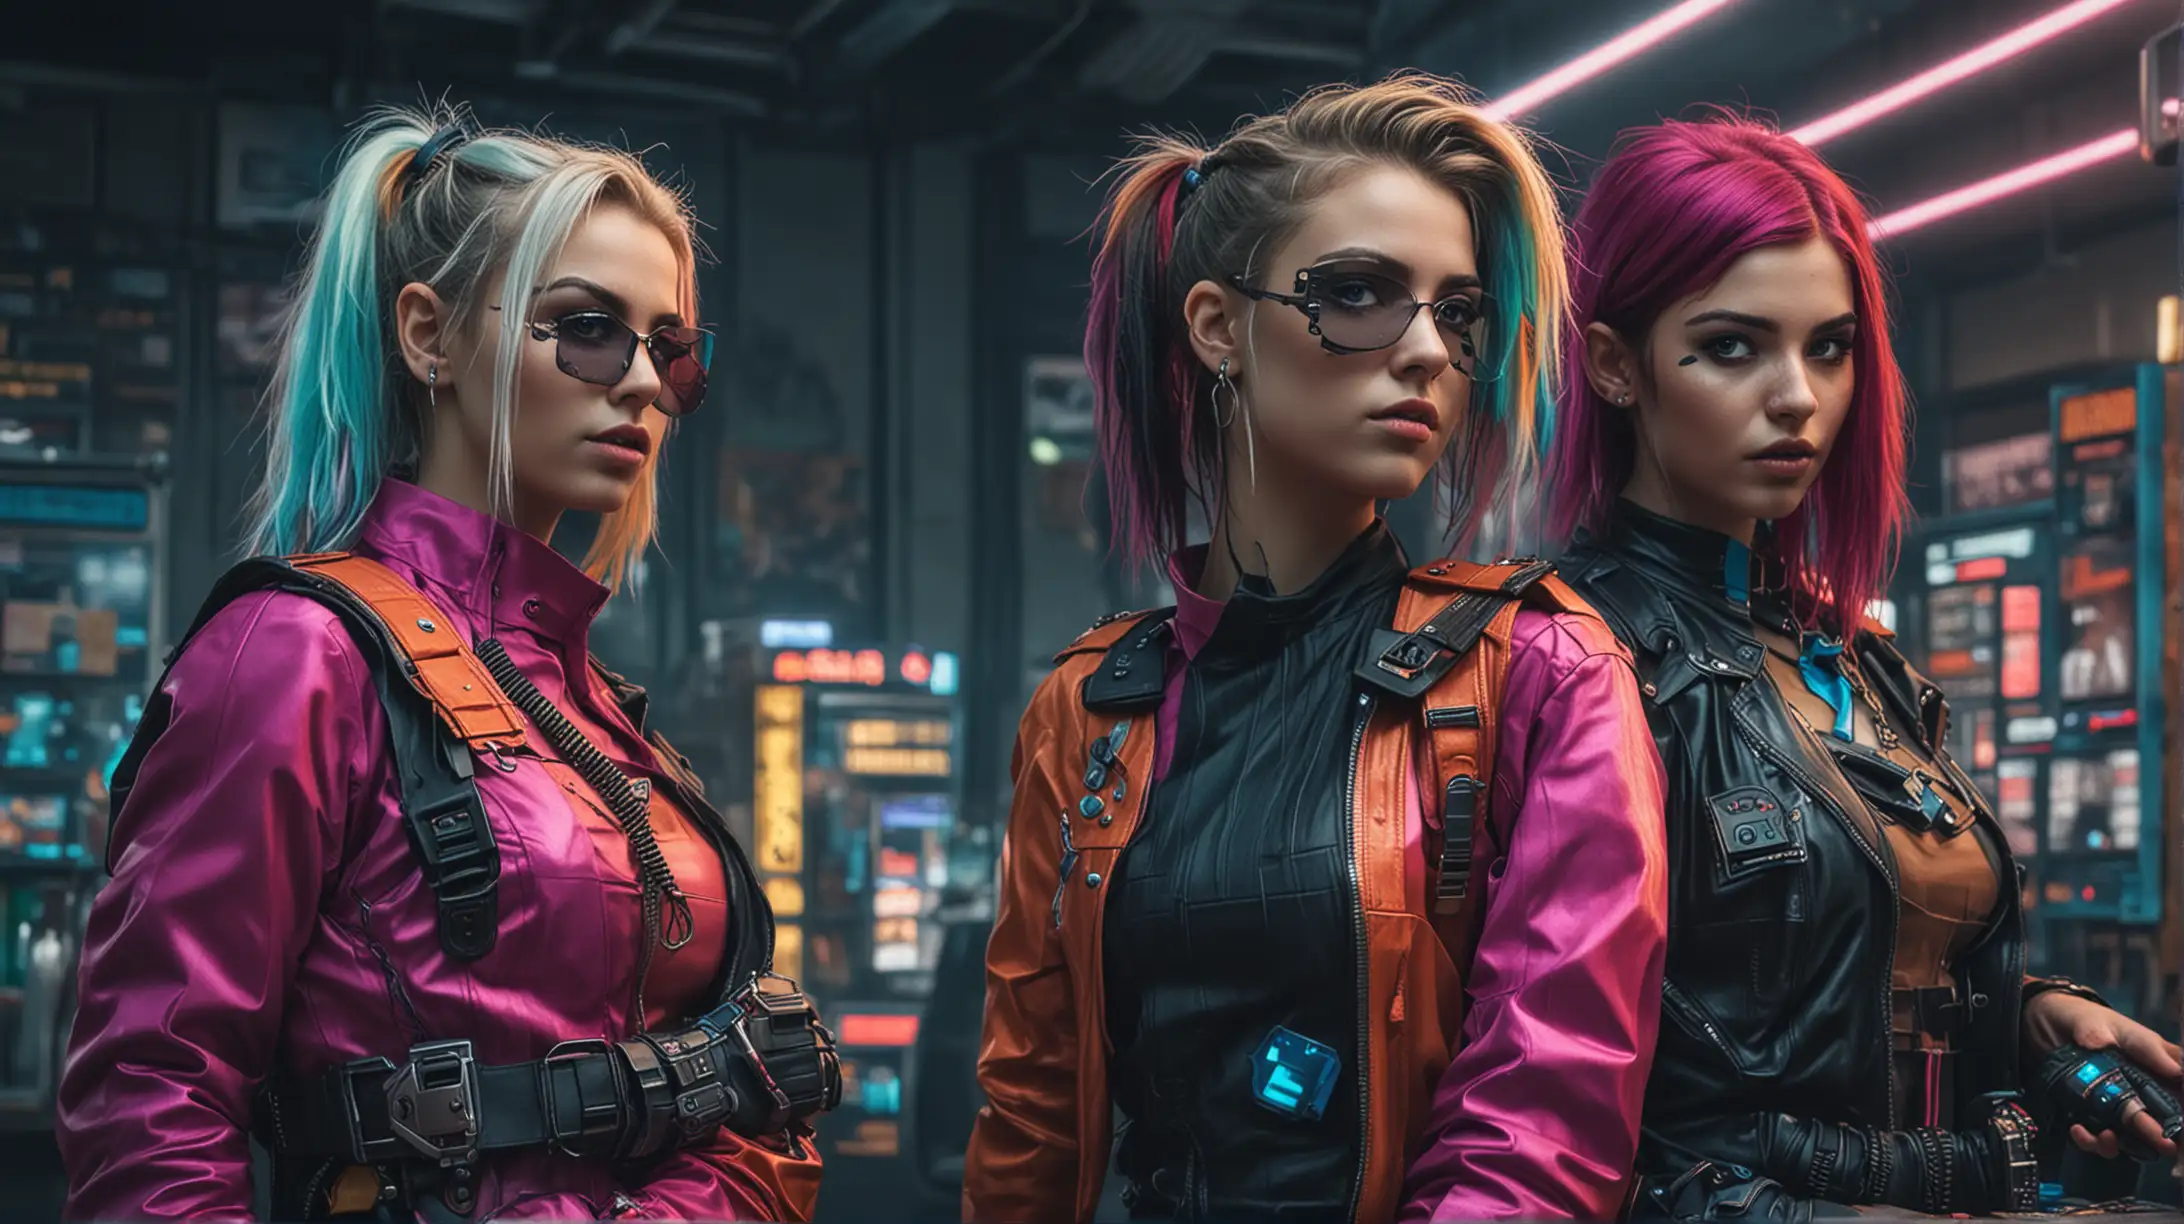 three young women in colorful cyberpunk uniforms robber a bank